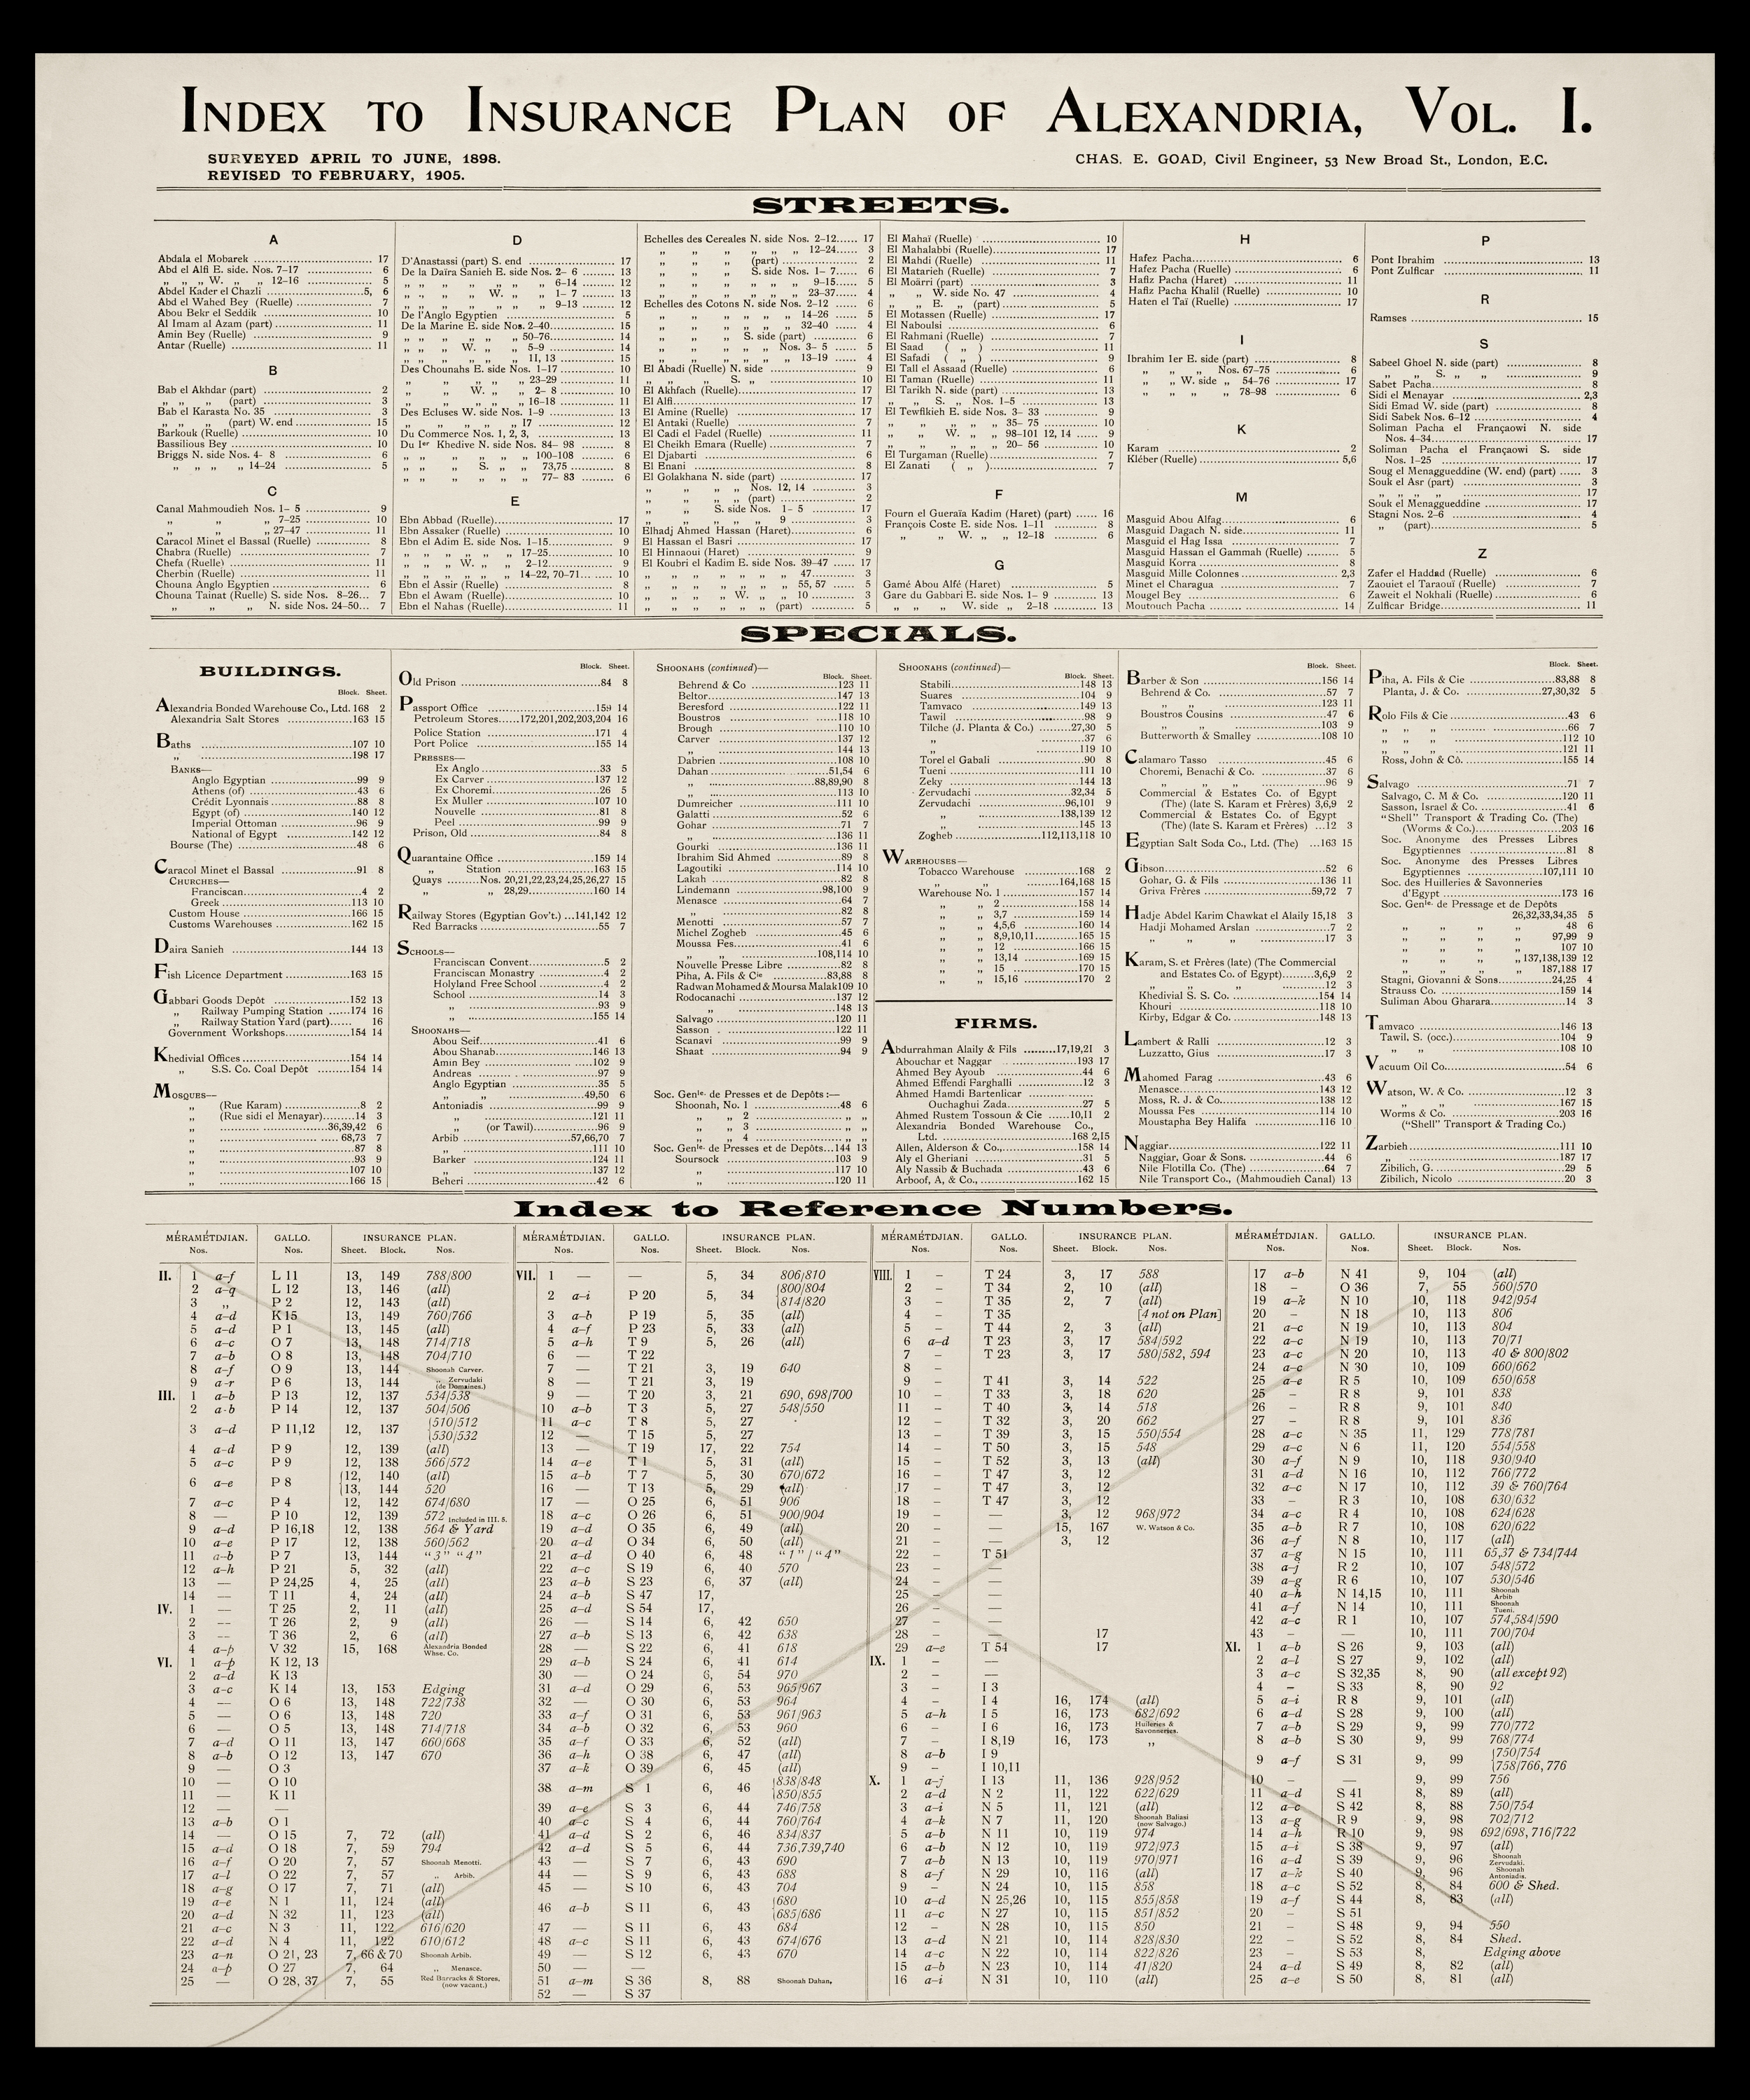 Charles E. Goad - A sheet from the&nbsp;<span style="font-style: italic;">Insurance Plan of Alexandria</span>. The complete set of plans can be found on&nbsp;<a href="https://www.archnet.org/publications/10217/" target="_blank" data-bypass="true">Archnet</a>, or as georeferenced versions in the&nbsp;<a href="http://calvert.hul.harvard.edu:8080/opengeoportal/openGeoPortalHome.jsp?BasicSearchTerm=ExternalLayerId:1203" target="_blank" data-bypass="true">Harvard Geospatial Library</a>.